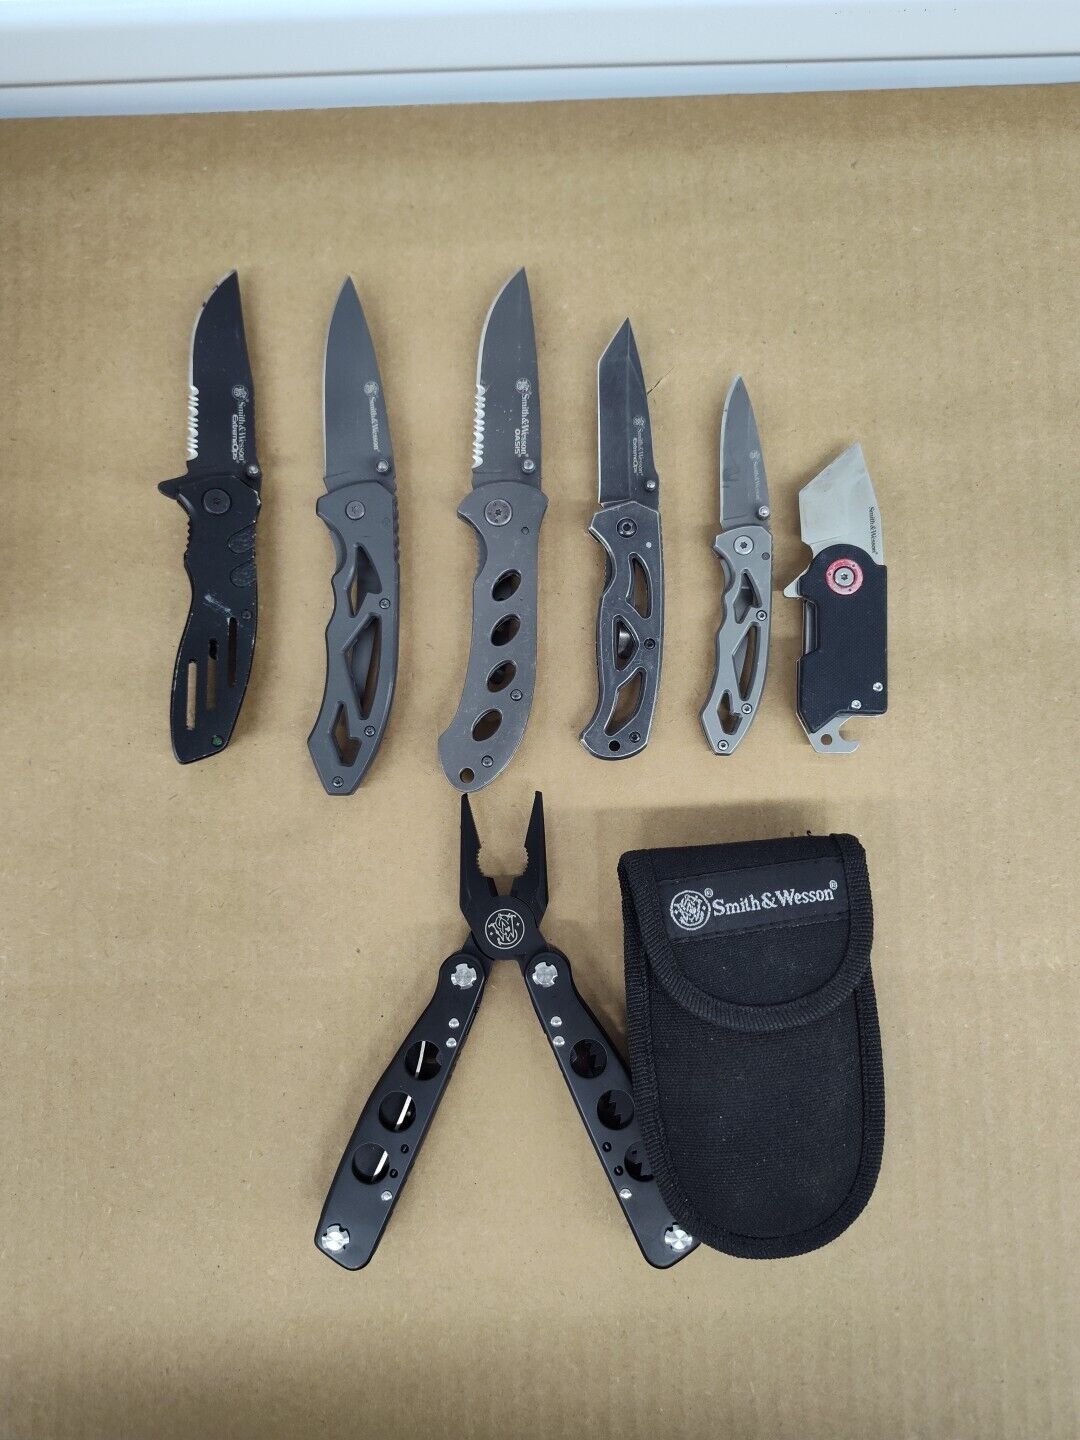 Lot C 7 TSA Confiscated SMITH AND WESSON EDC M&P SWAT More Pocket Knives Multi 